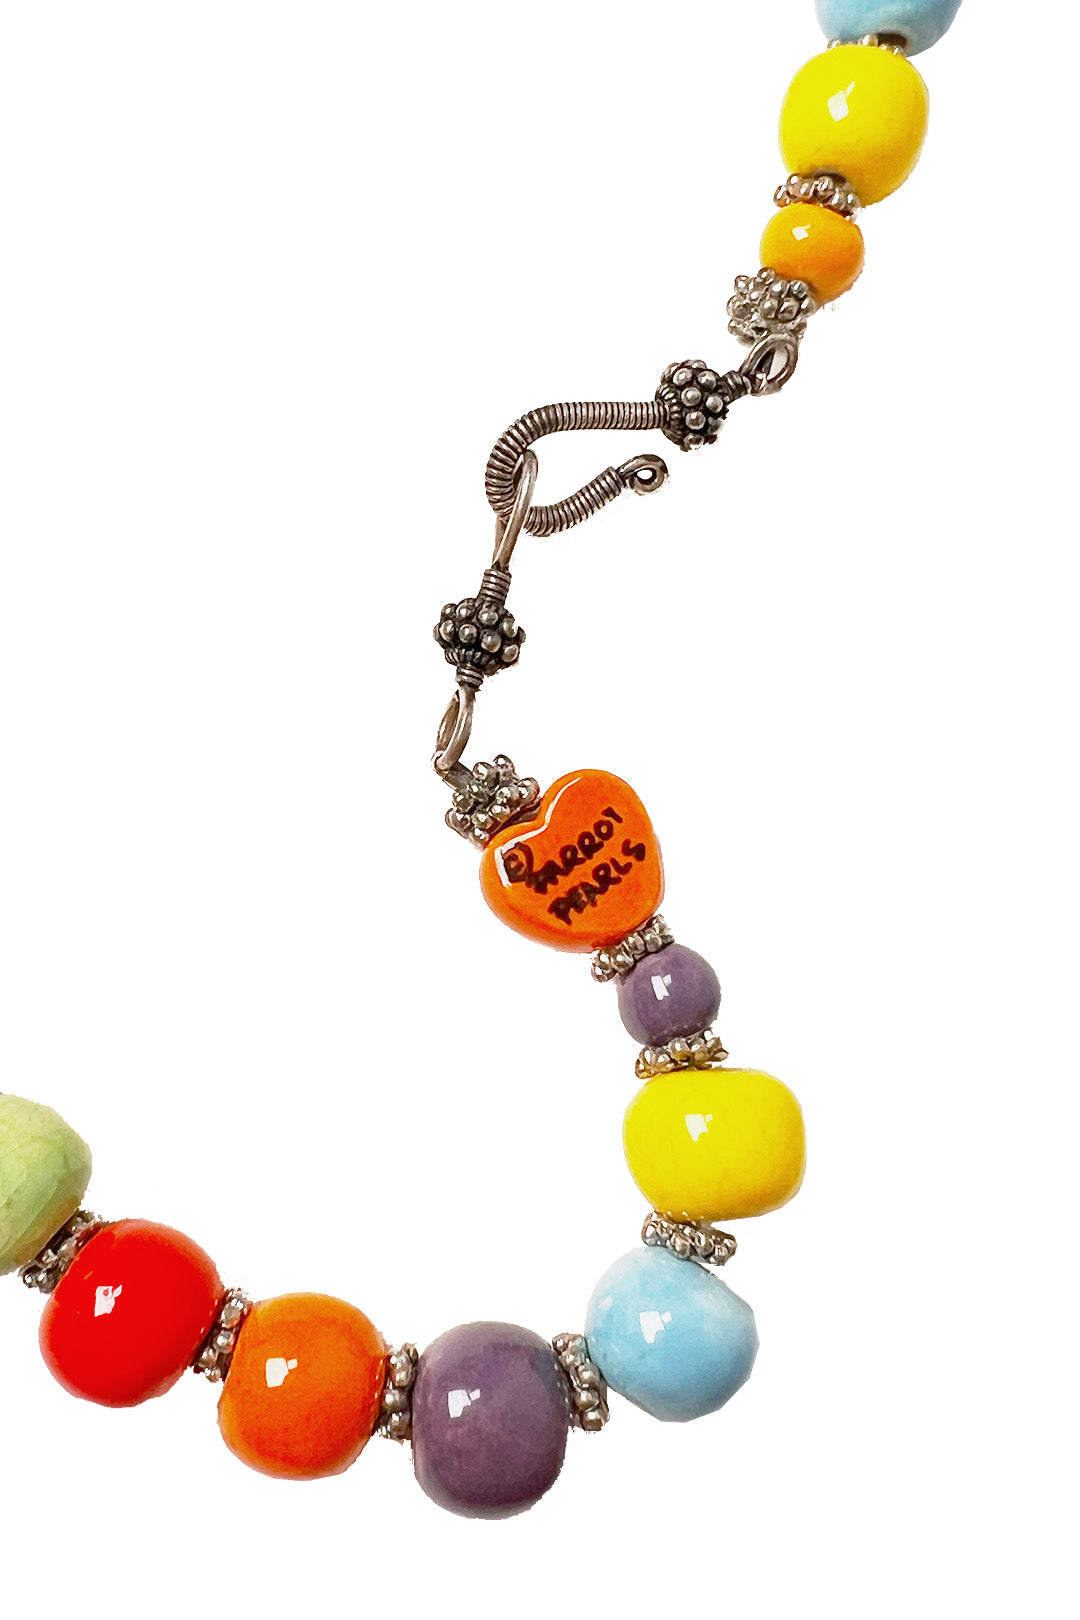 Parrot Pearls Ceramic Clown Necklace